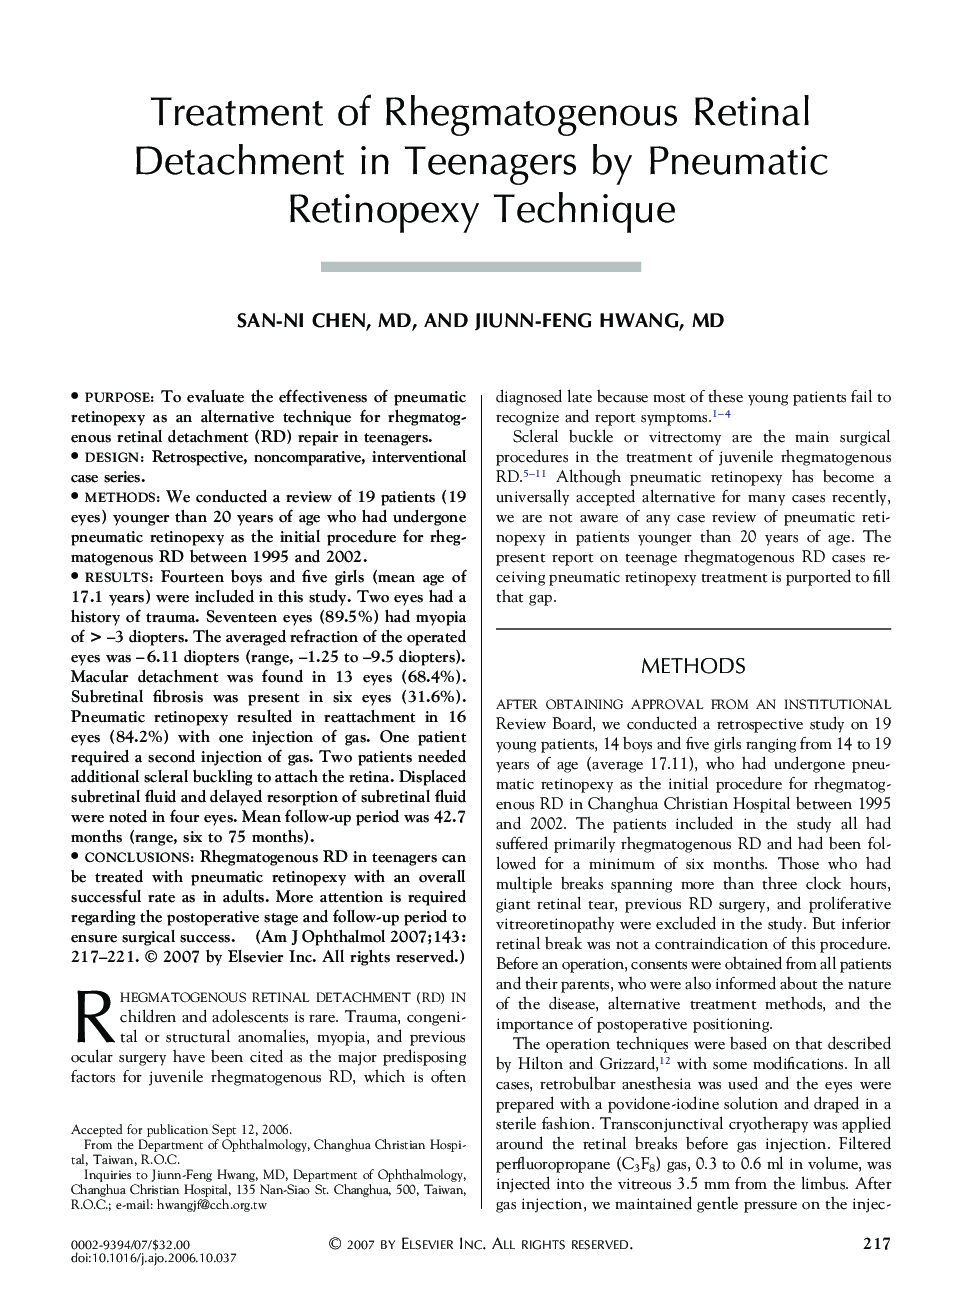 Treatment of Rhegmatogenous Retinal Detachment in Teenagers by Pneumatic Retinopexy Technique